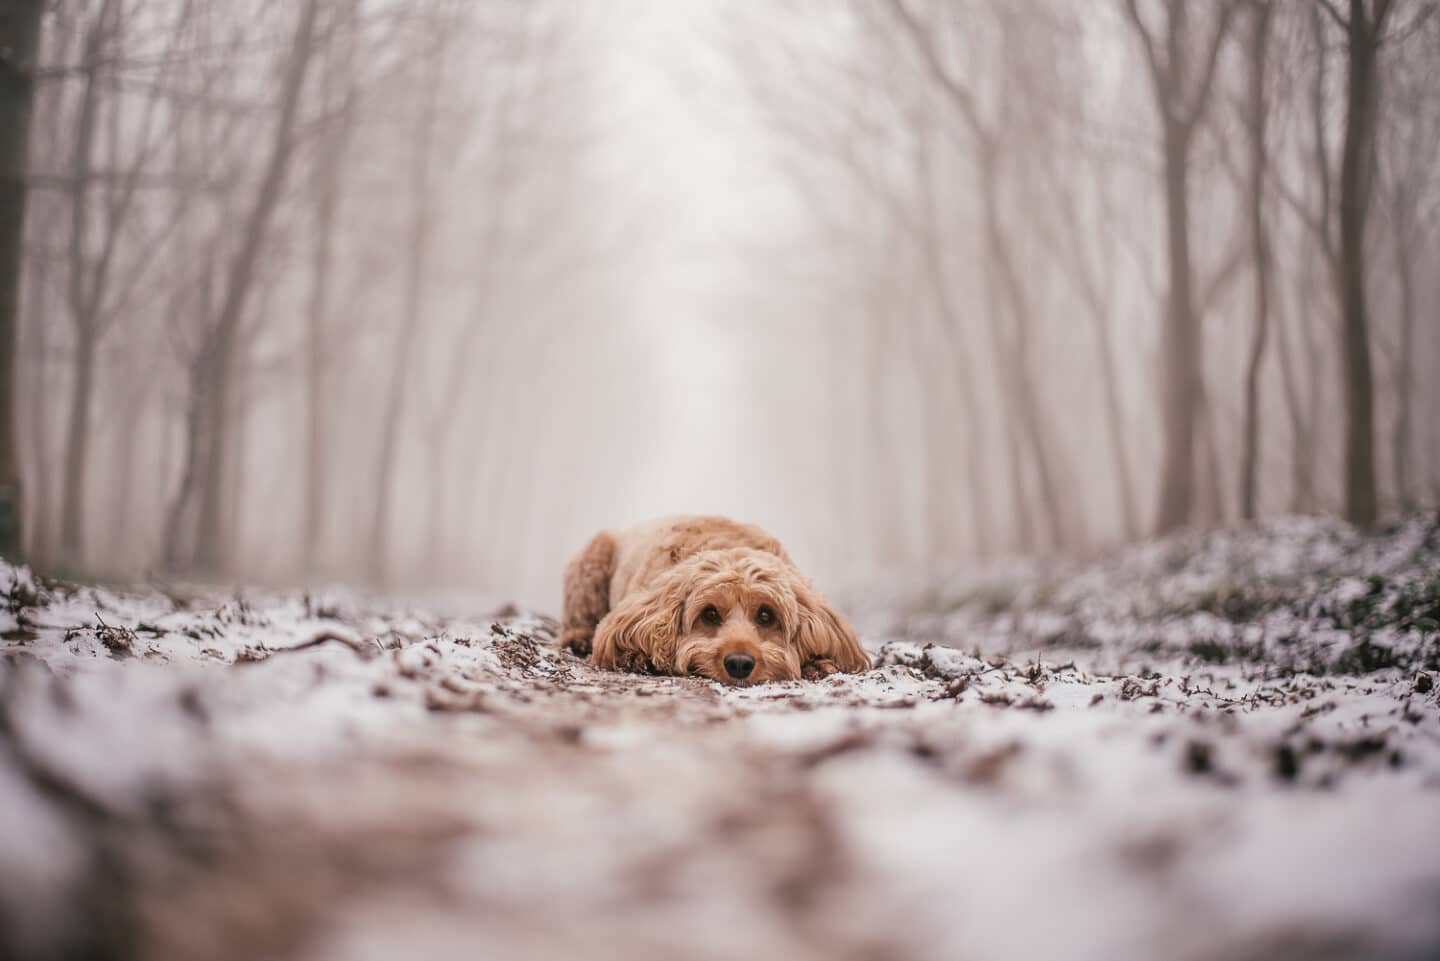 Light ginger dog lying on snowy ground in a woodland. Misty trees in the background.